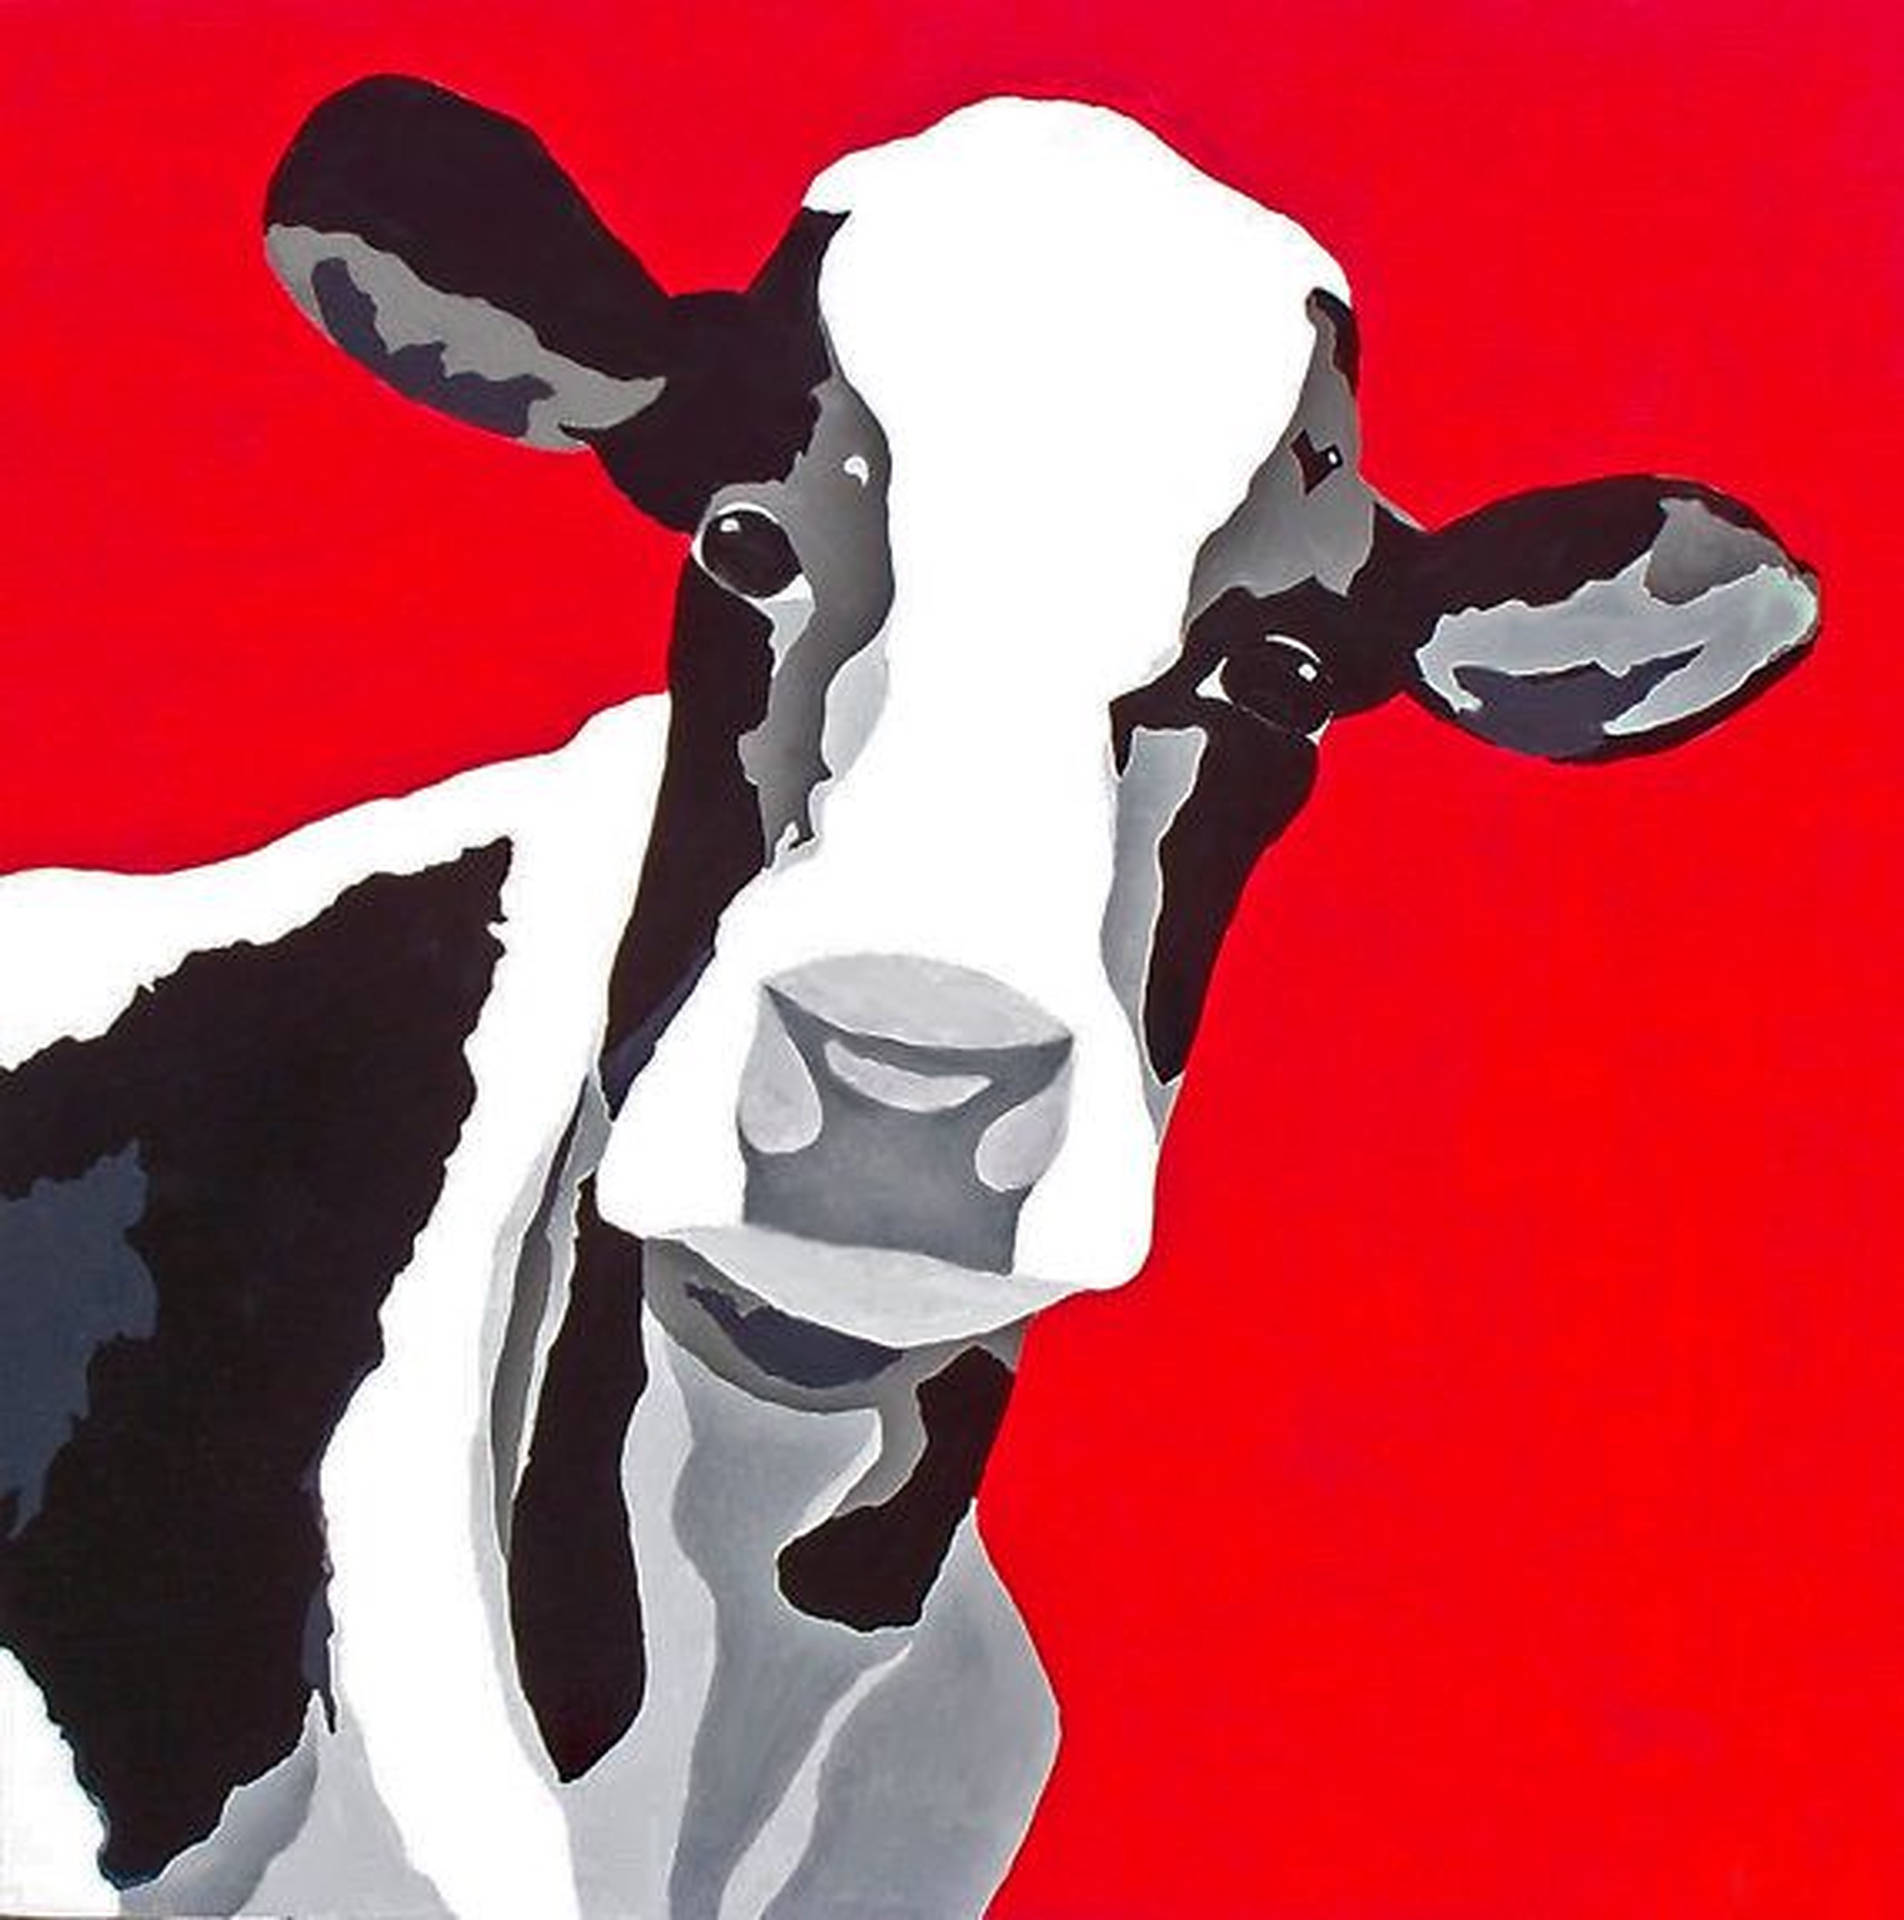 Cow Print Red Painting Wallpaper